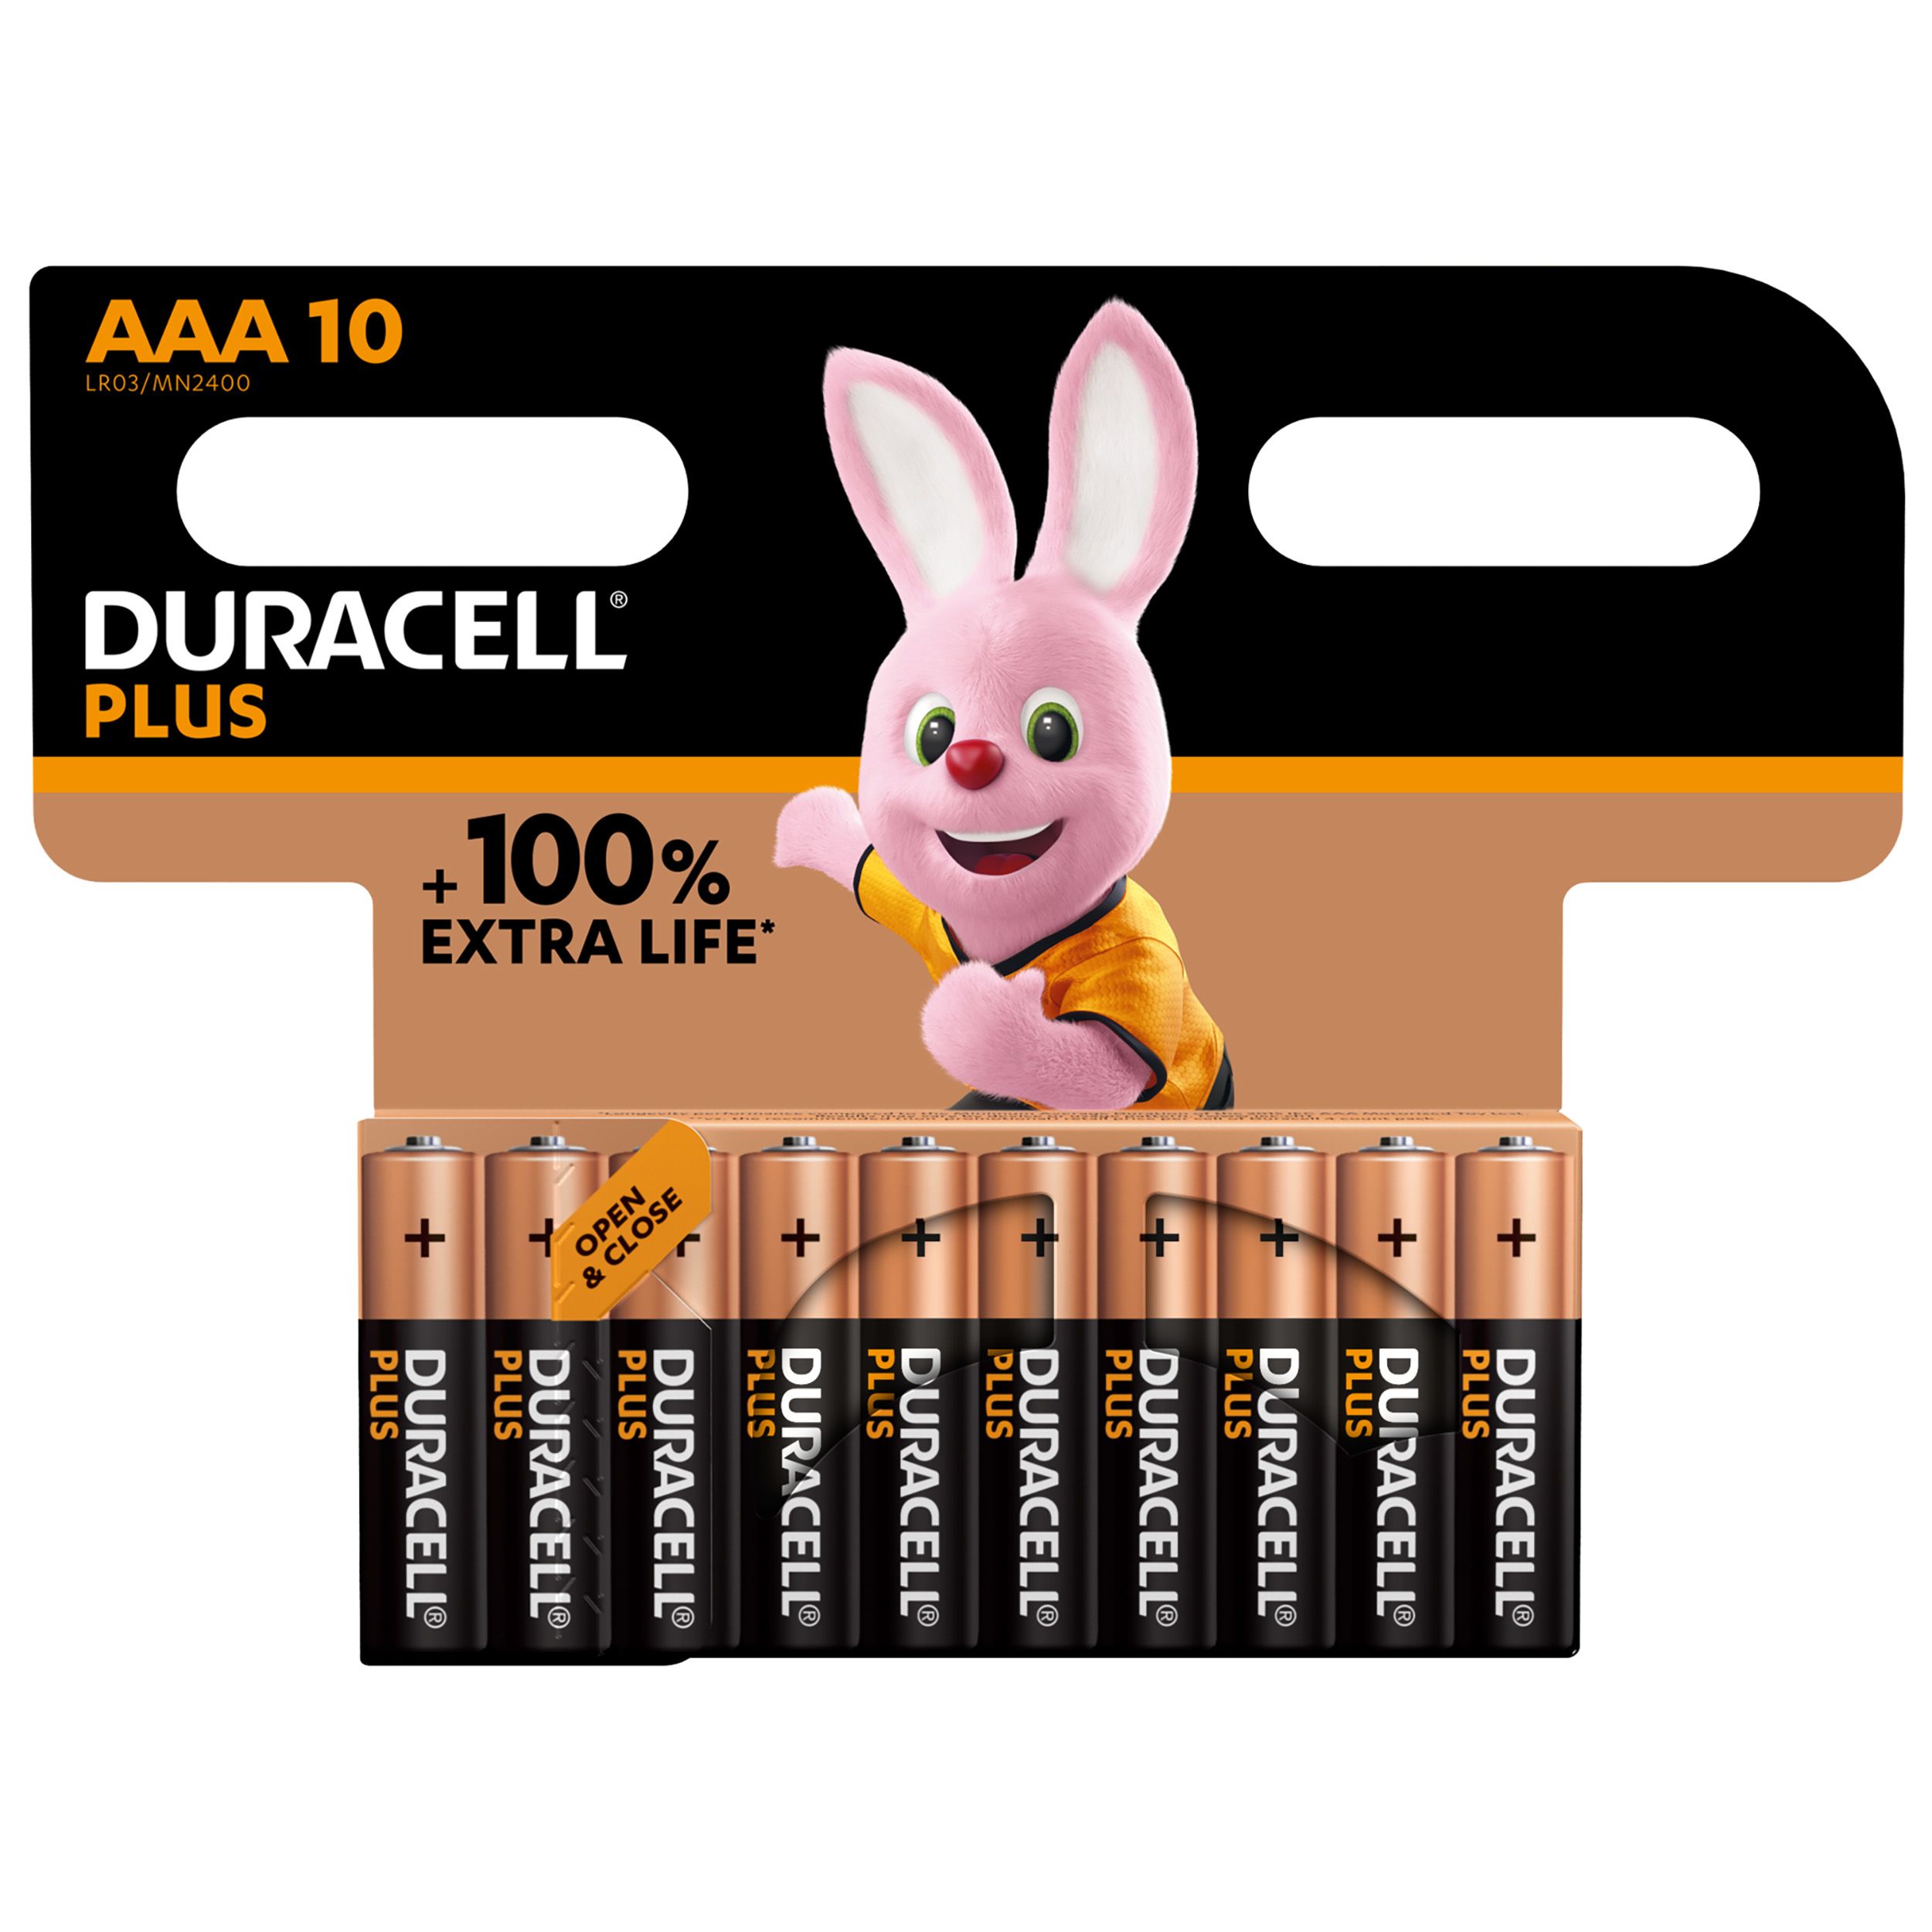 Duracell Duracell Plus Alkaline Manganese Dioxide AAA Battery 1.5V